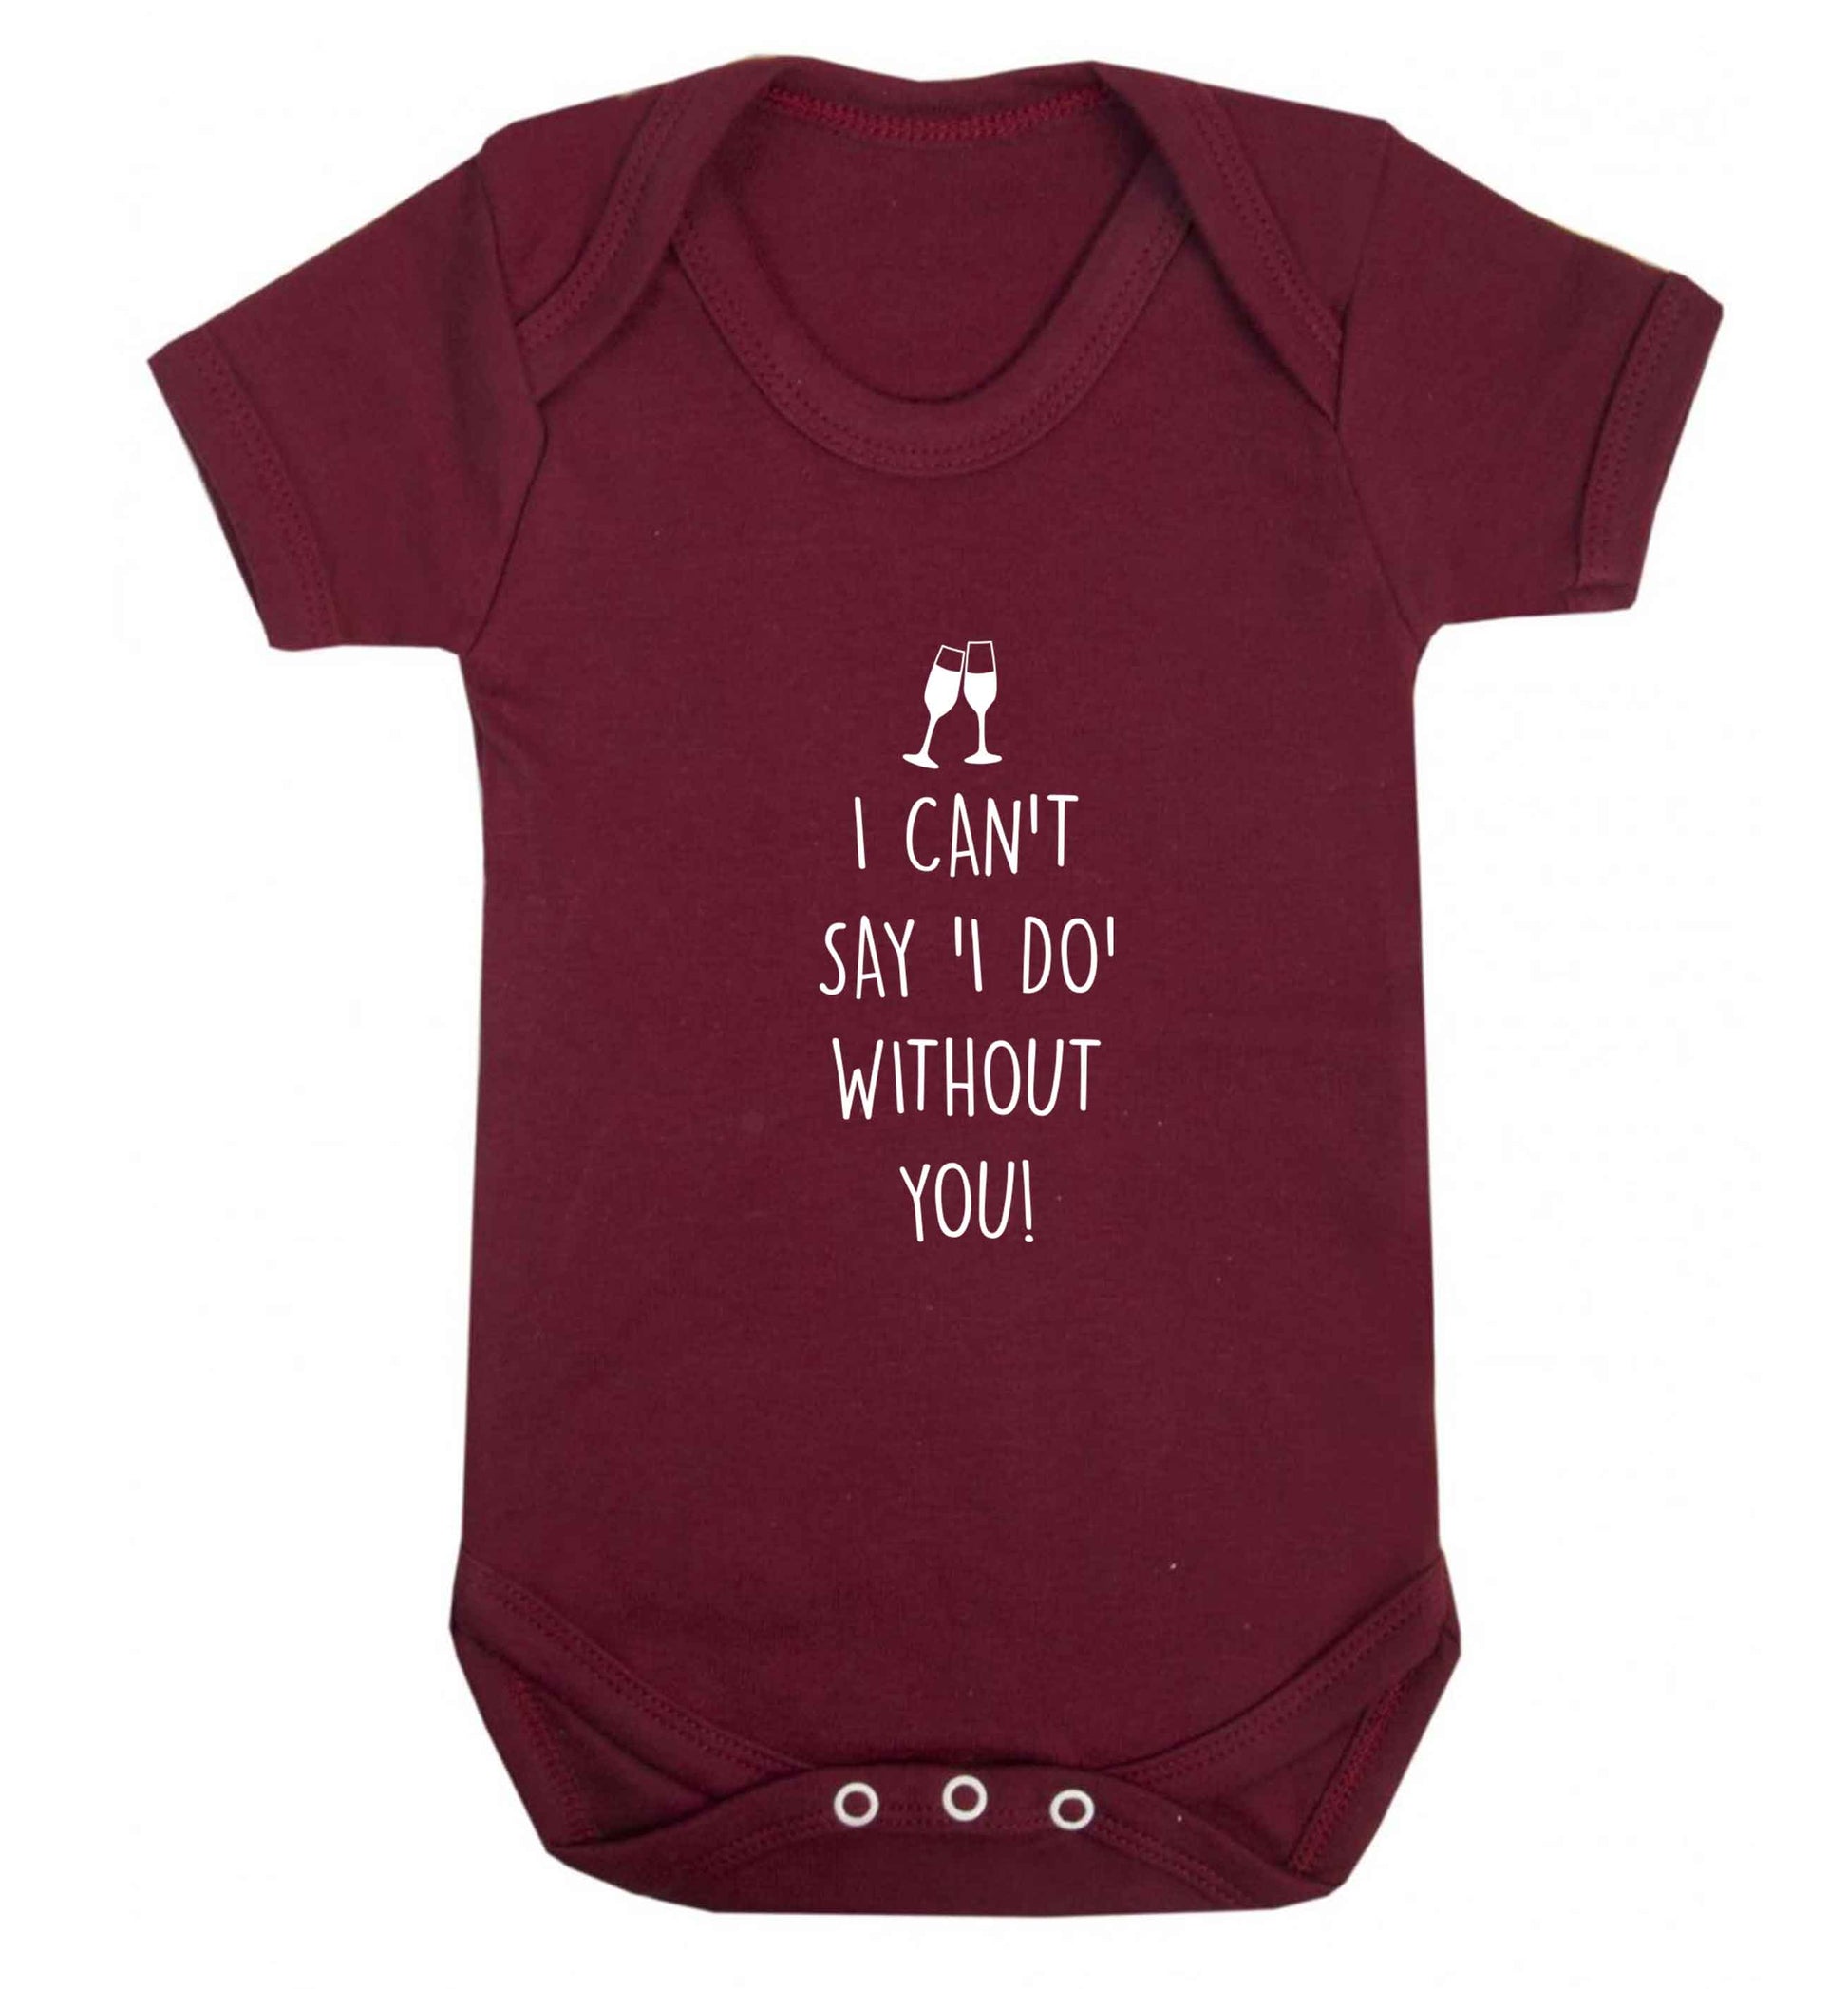 I can't say 'I do' without you! baby vest maroon 18-24 months